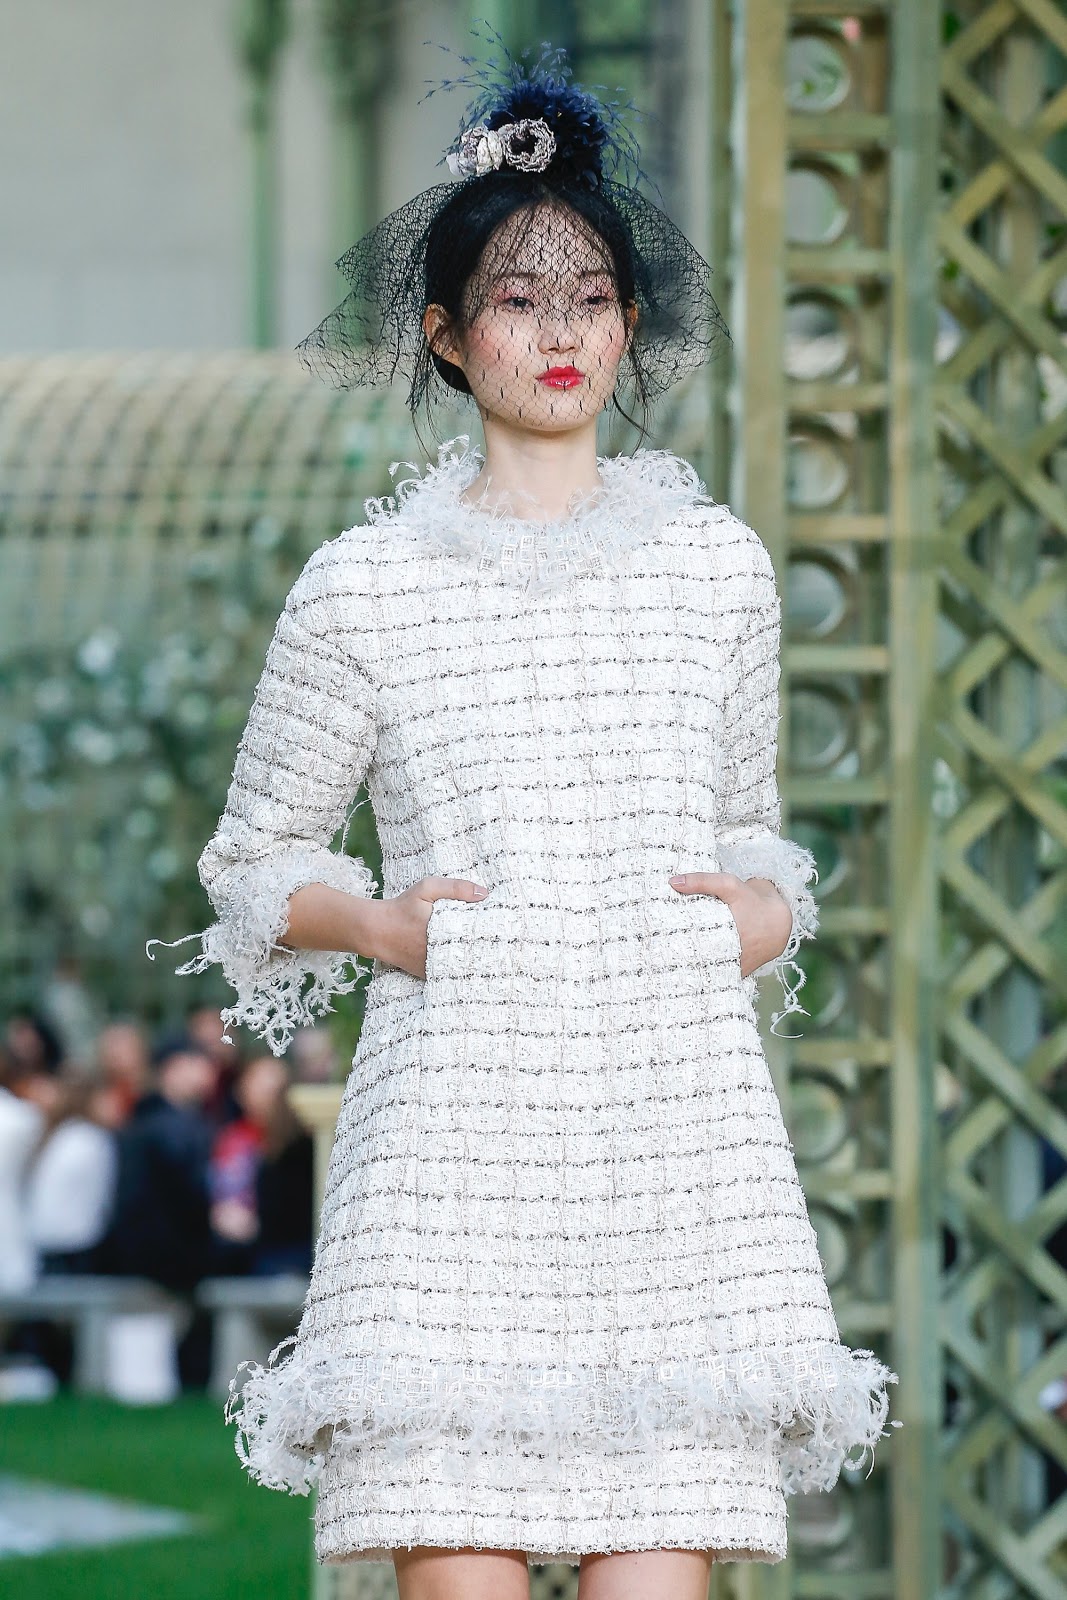 Chanel Haute Couture Spring/Summer 2018, Paris. | Cool Chic Style Fashion